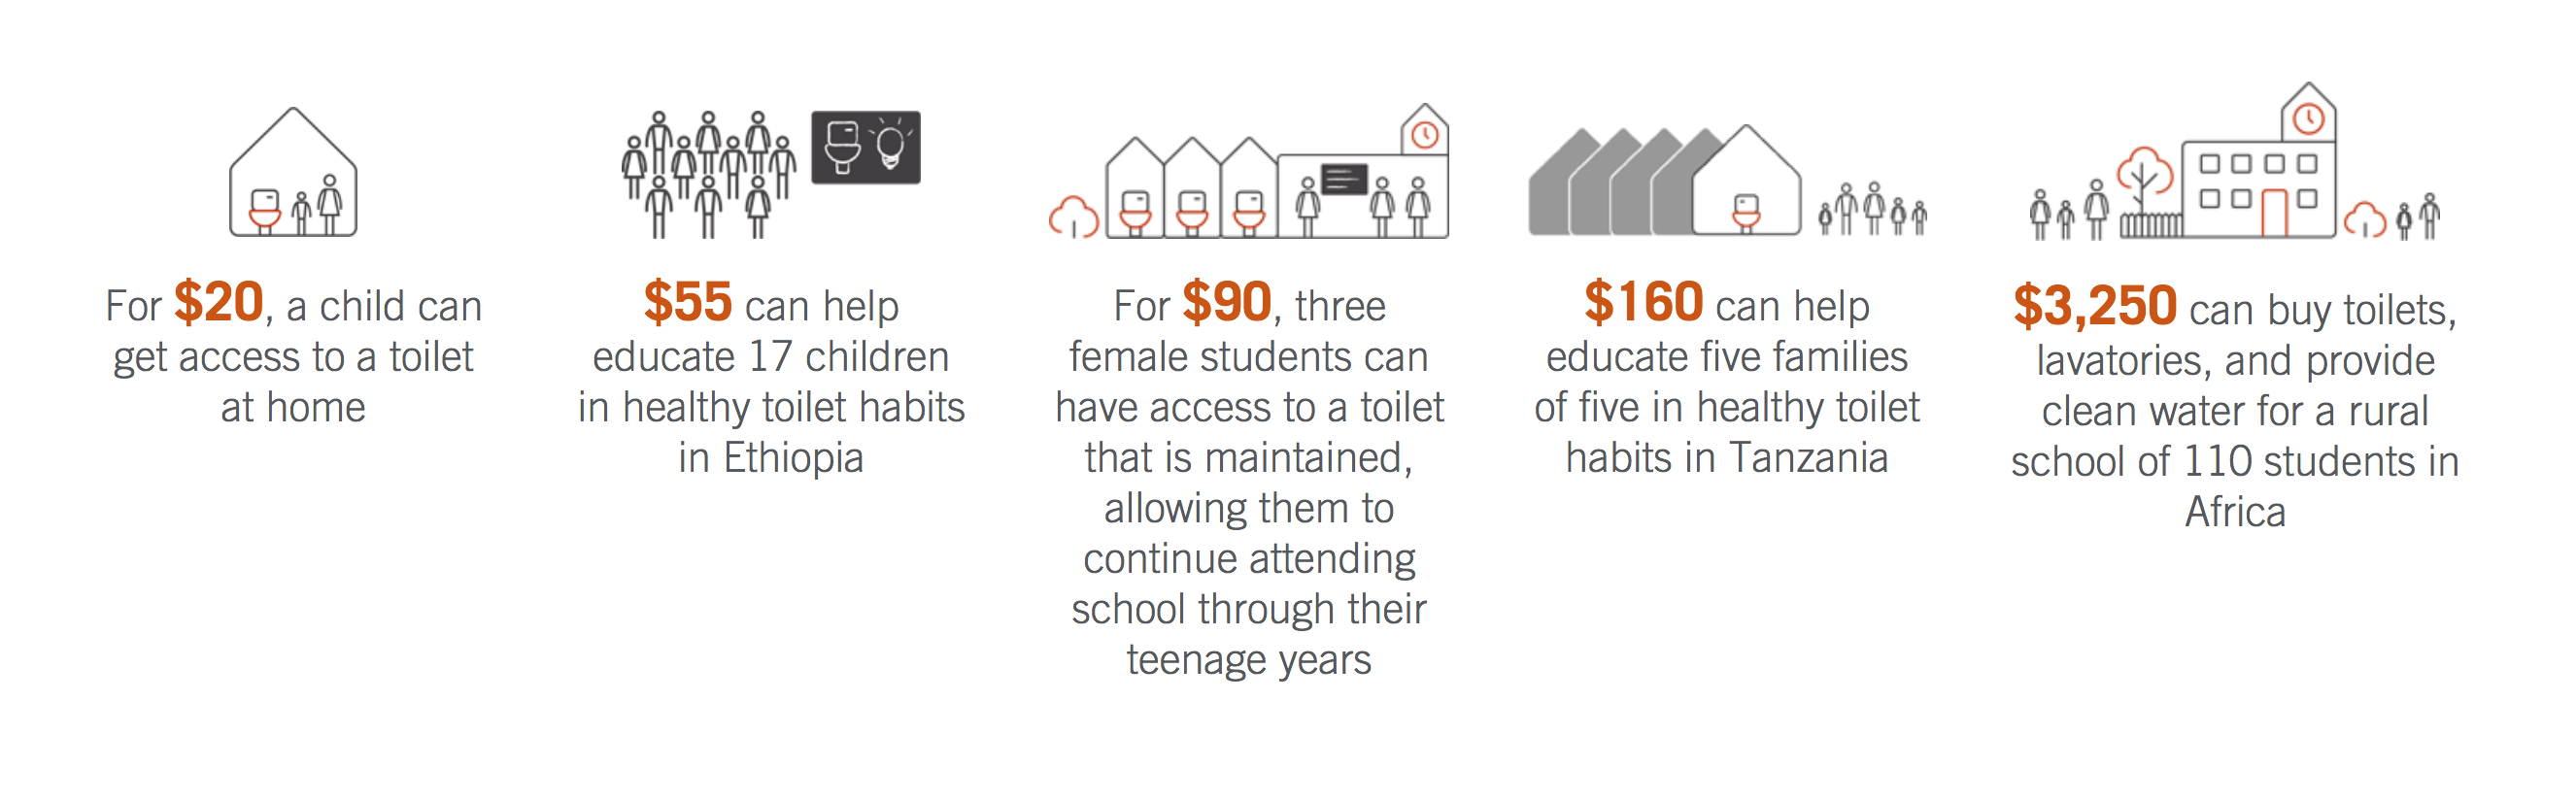 Info graphic on access to toilets